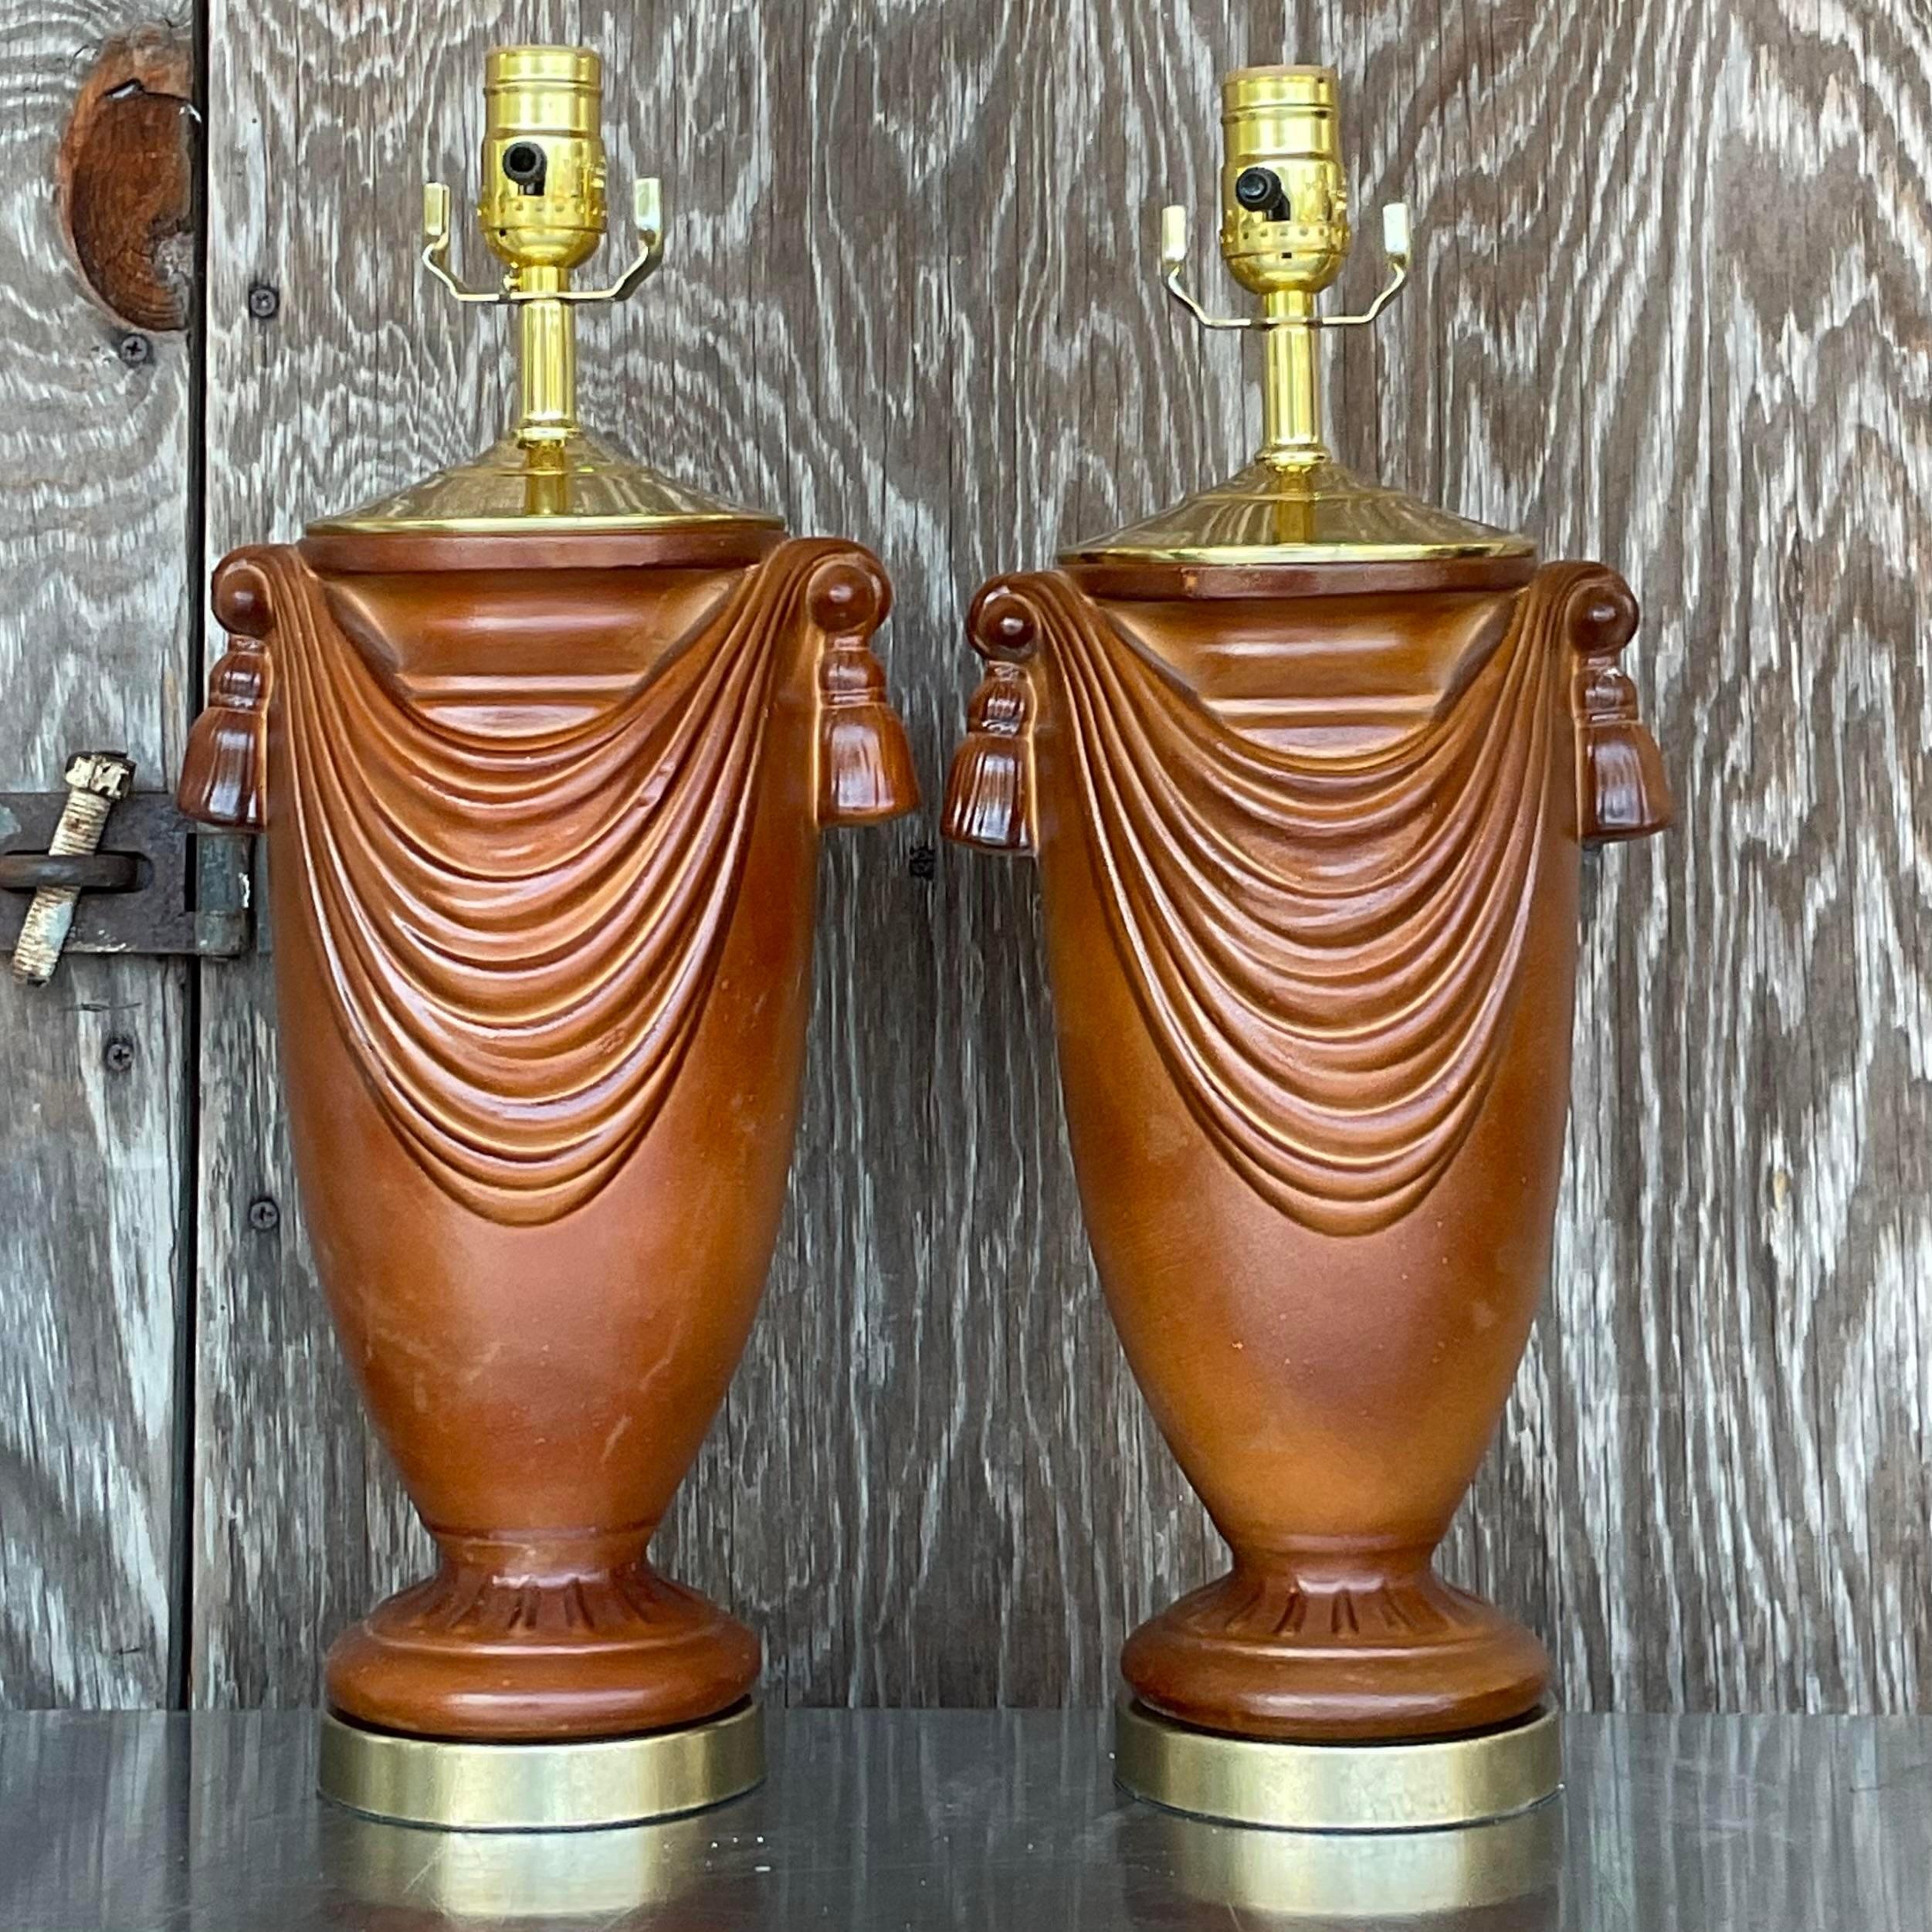 American Vintage Boho Glazed Ceramic Swag Lamps - a Pair For Sale